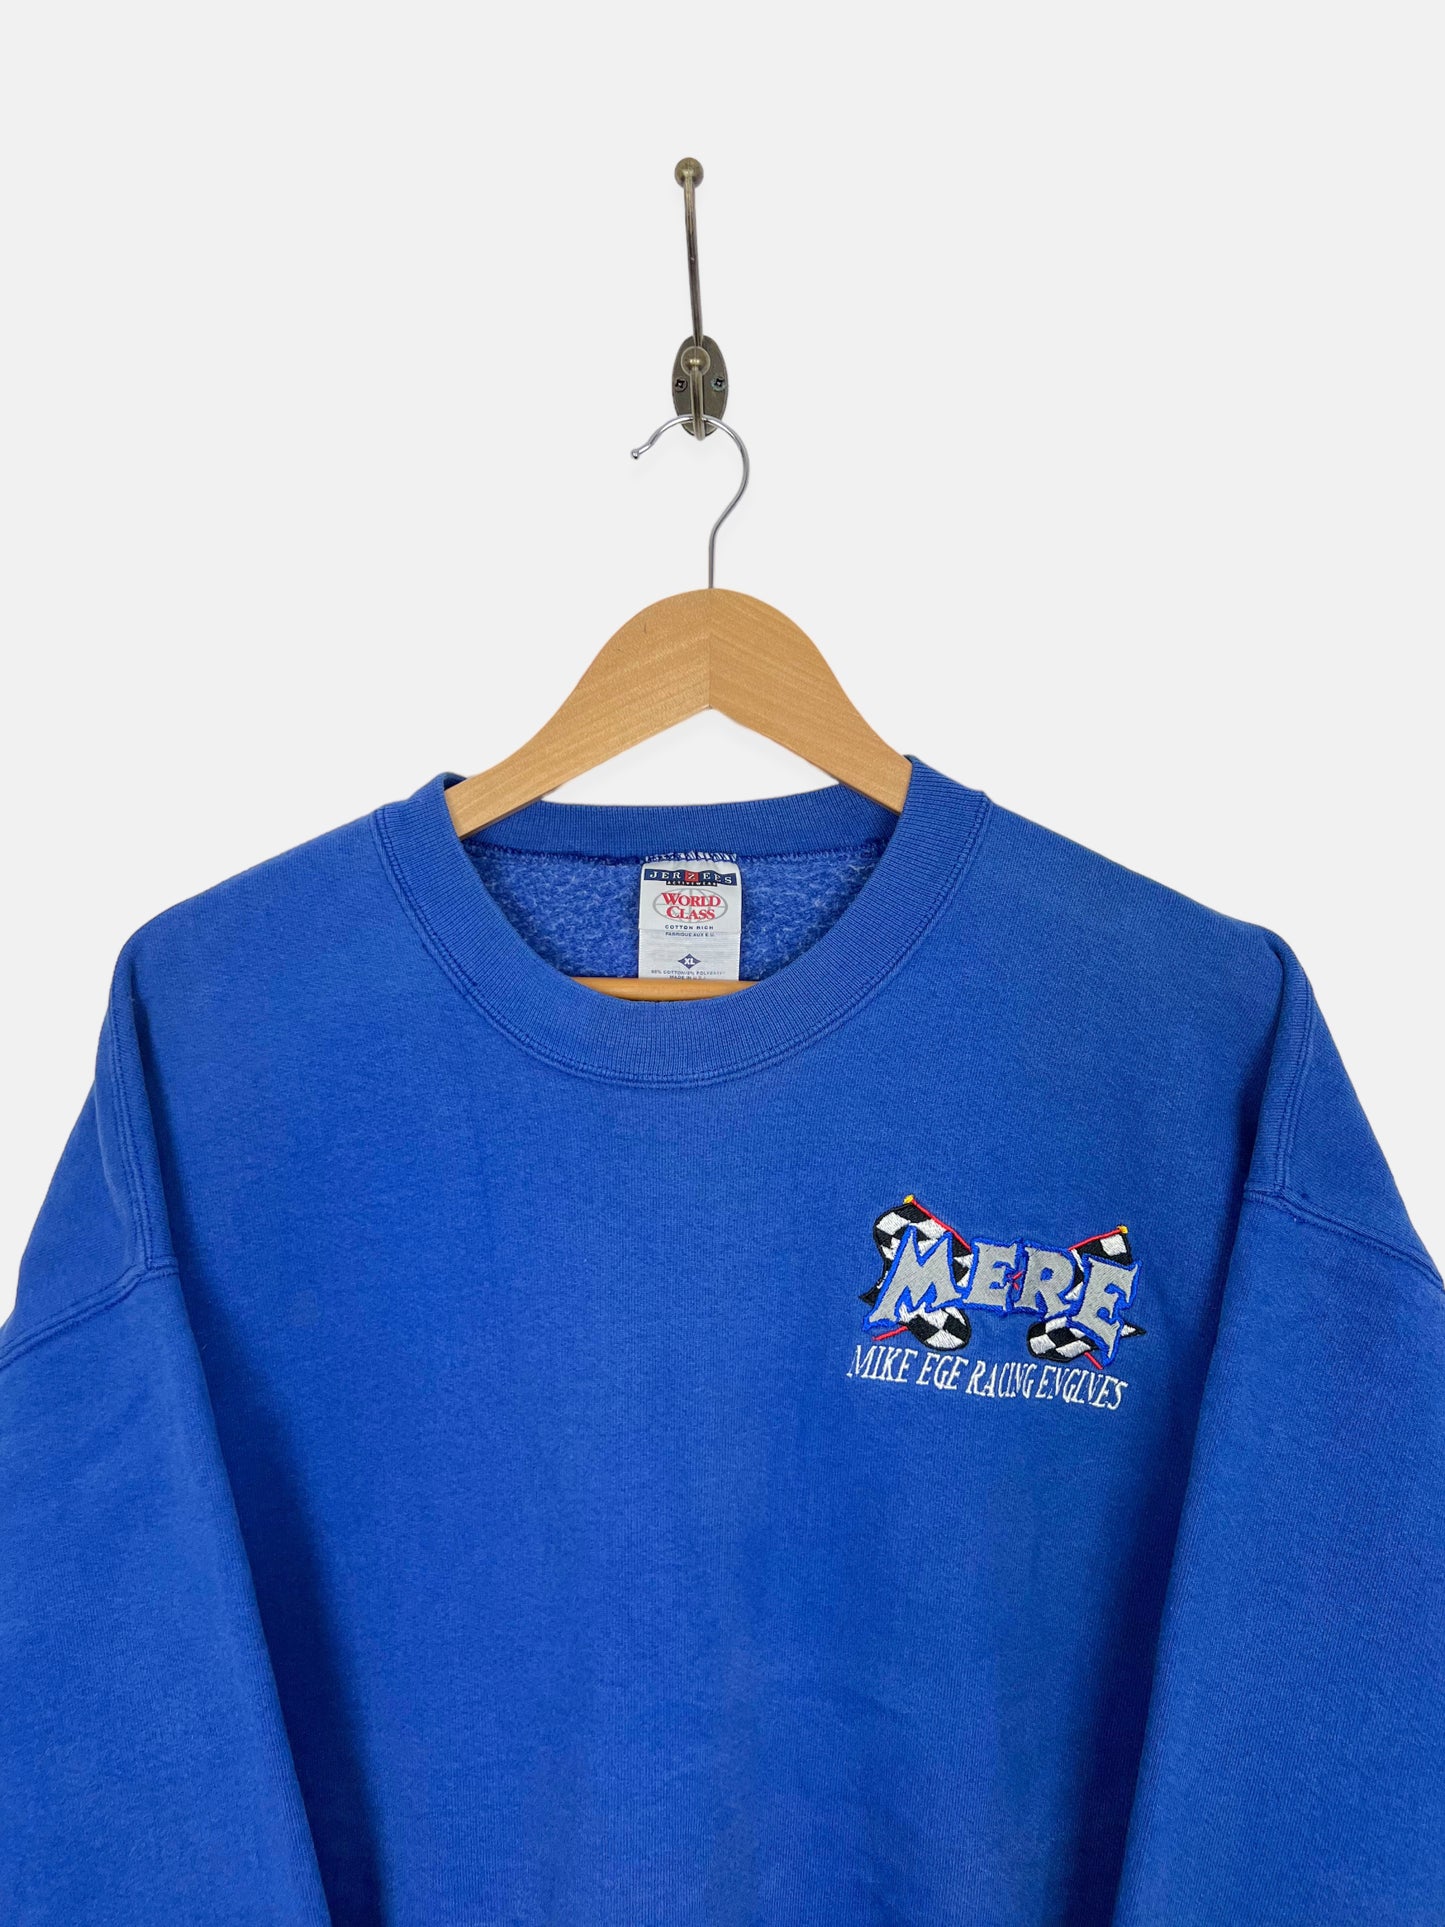 90's Mike Ege Racing Engines USA Made Embroidered Vintage Sweatshirt Size XL-2XL